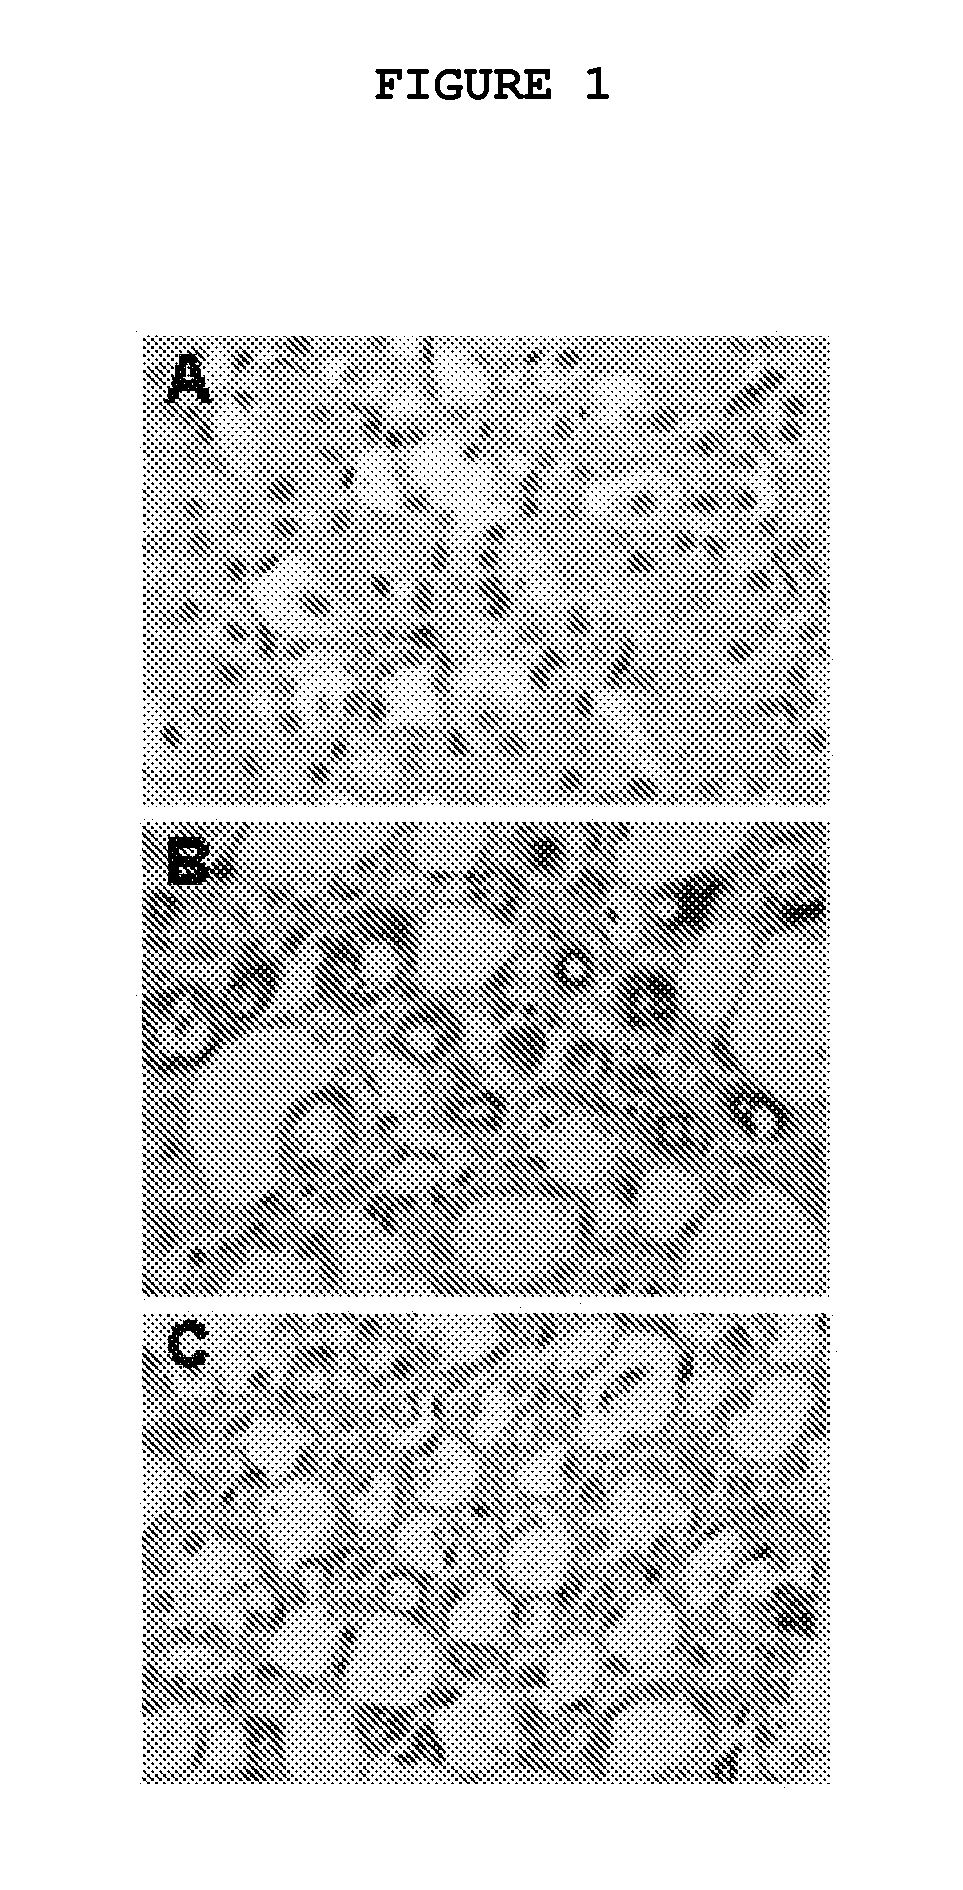 Composition and Method for Treating Fibrotic Diseases